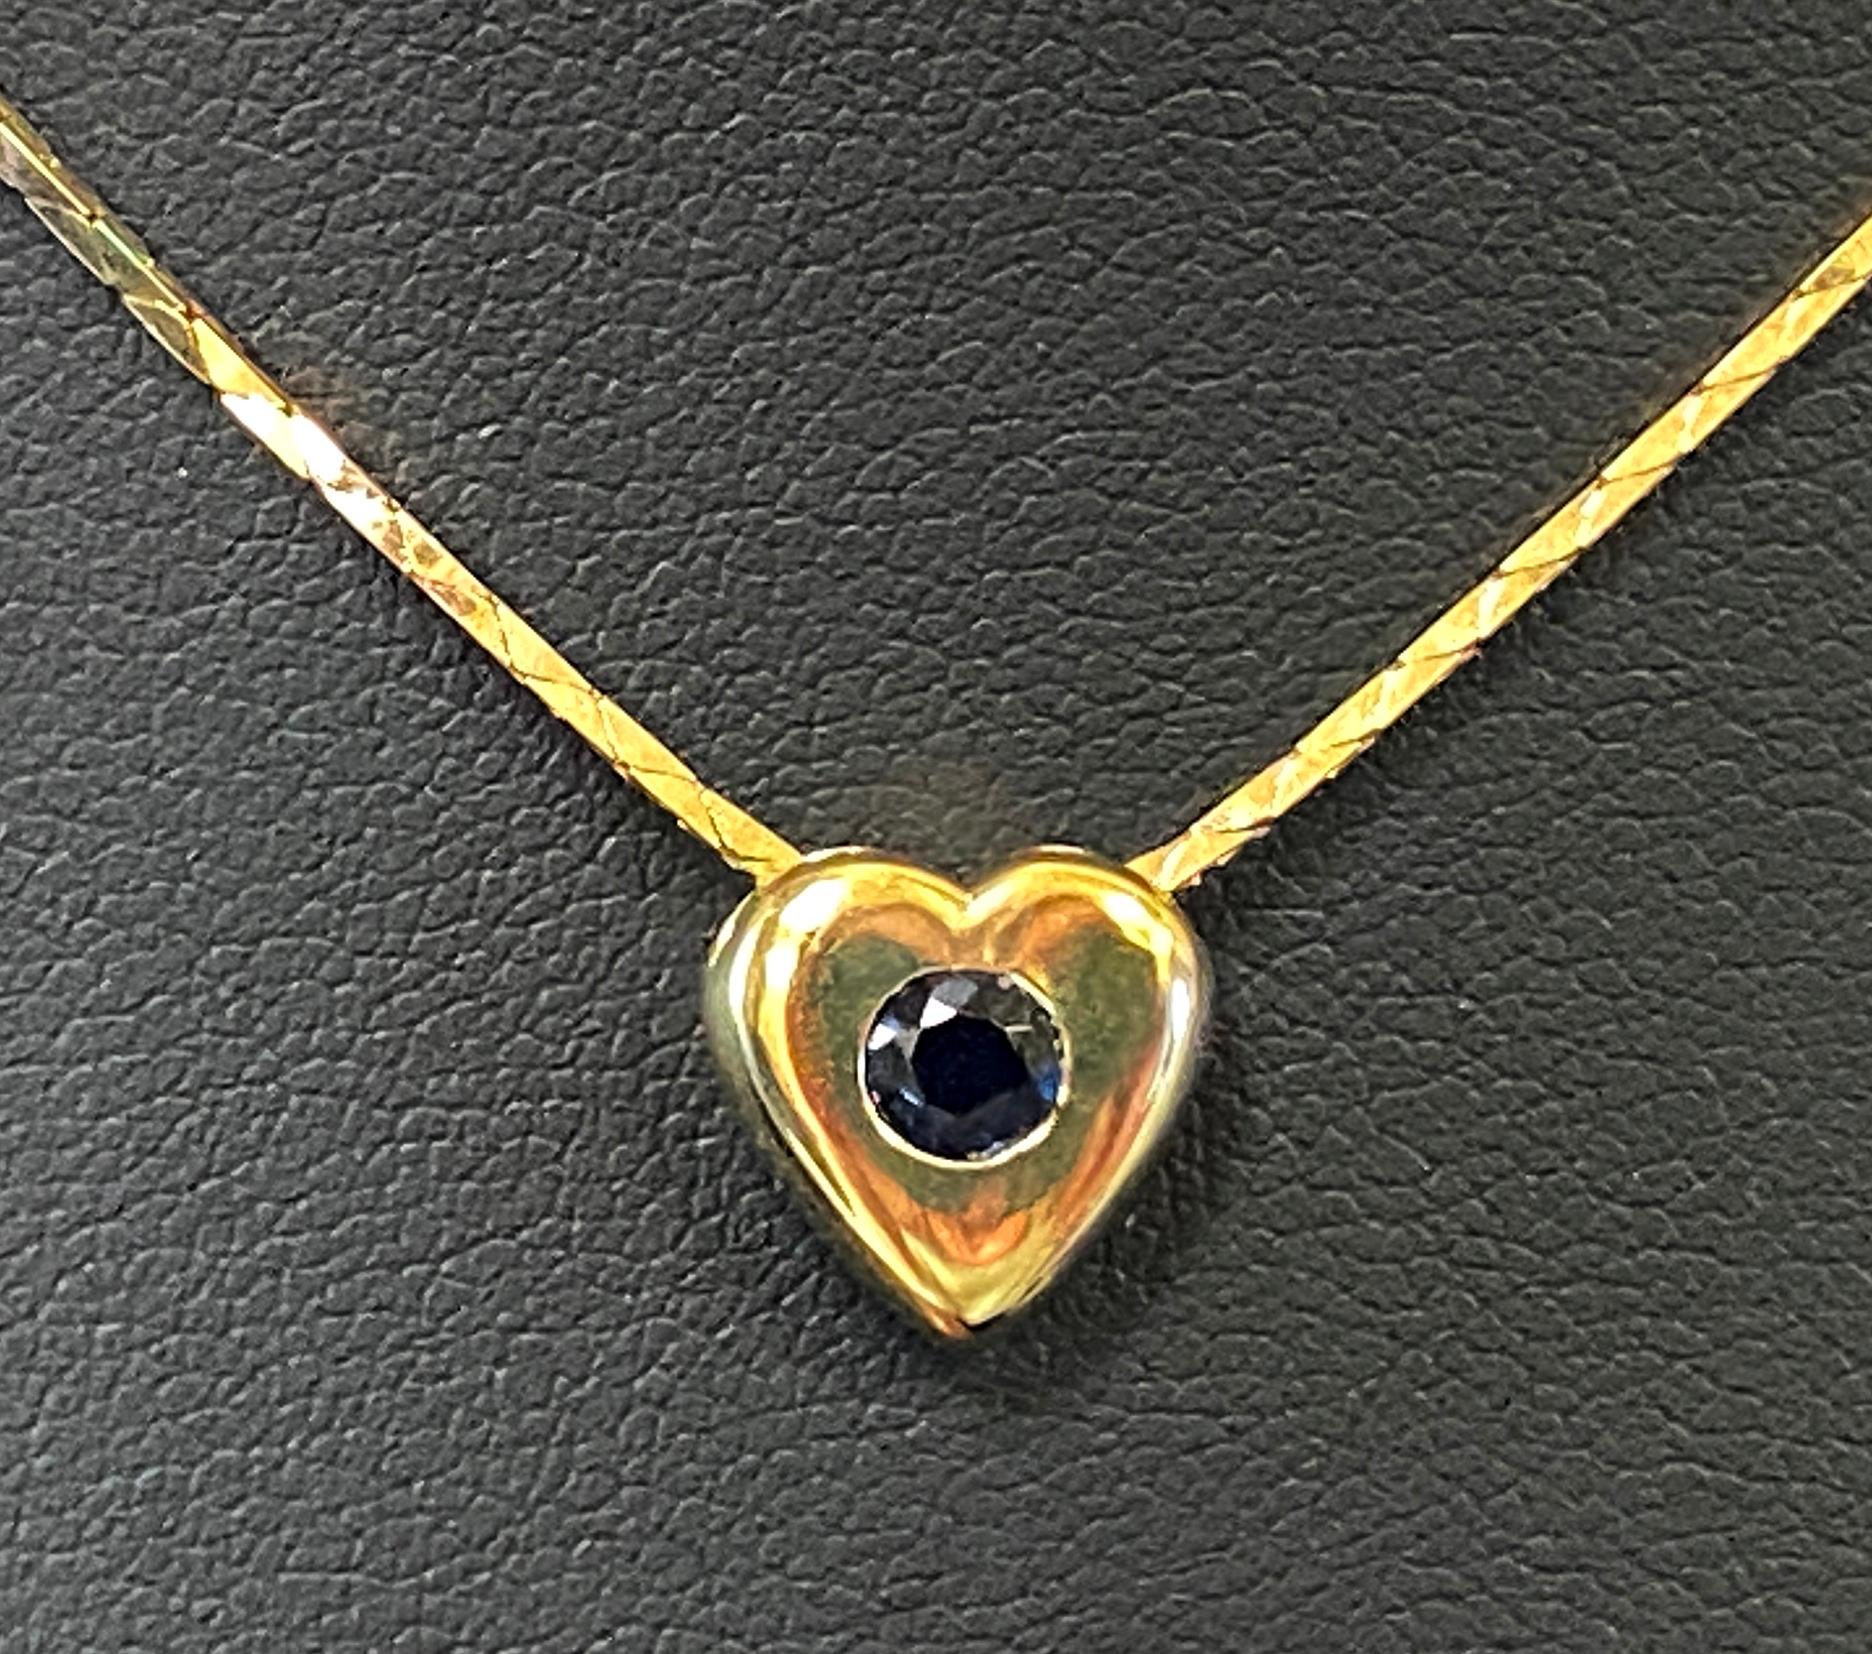 Women's or Men's 14kt Yellow Gold Heart Pendant with Diamond and Sapphire Center